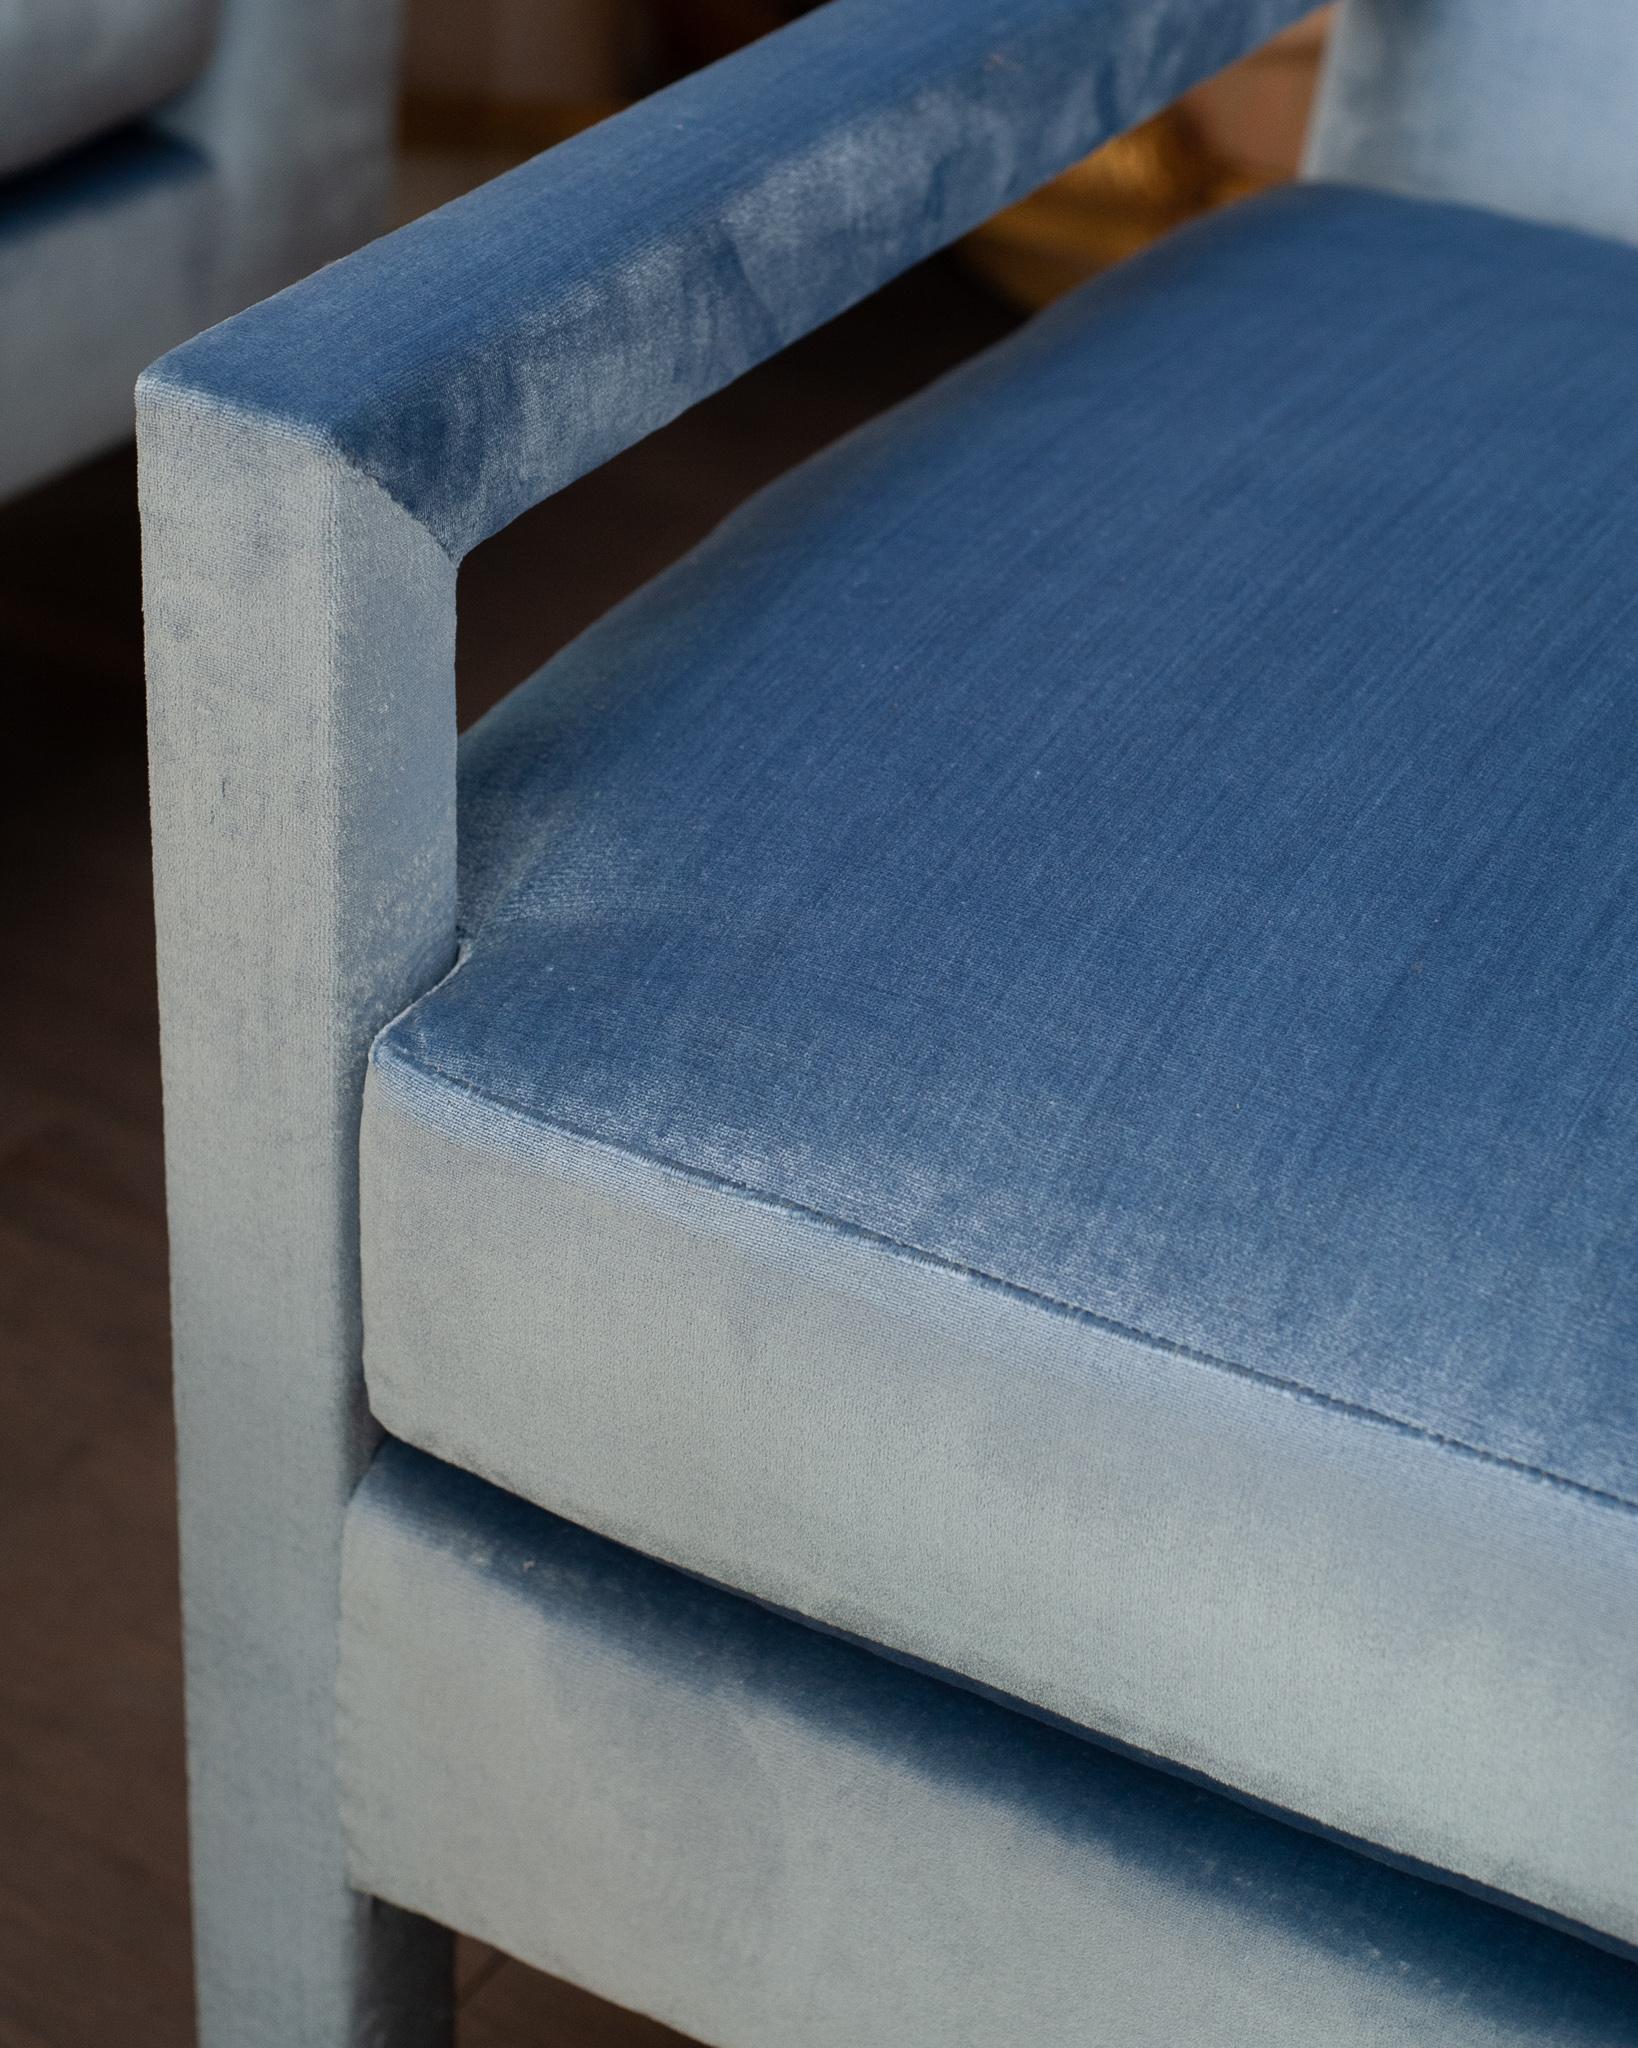 These Parsons chairs are custom designed and are fully upholstered in a rich delft blue silk velvet from Paris by Studio Maison Nurita's master upholsterer. One of the most significant investment pieces in one's home should be a set of beautiful and